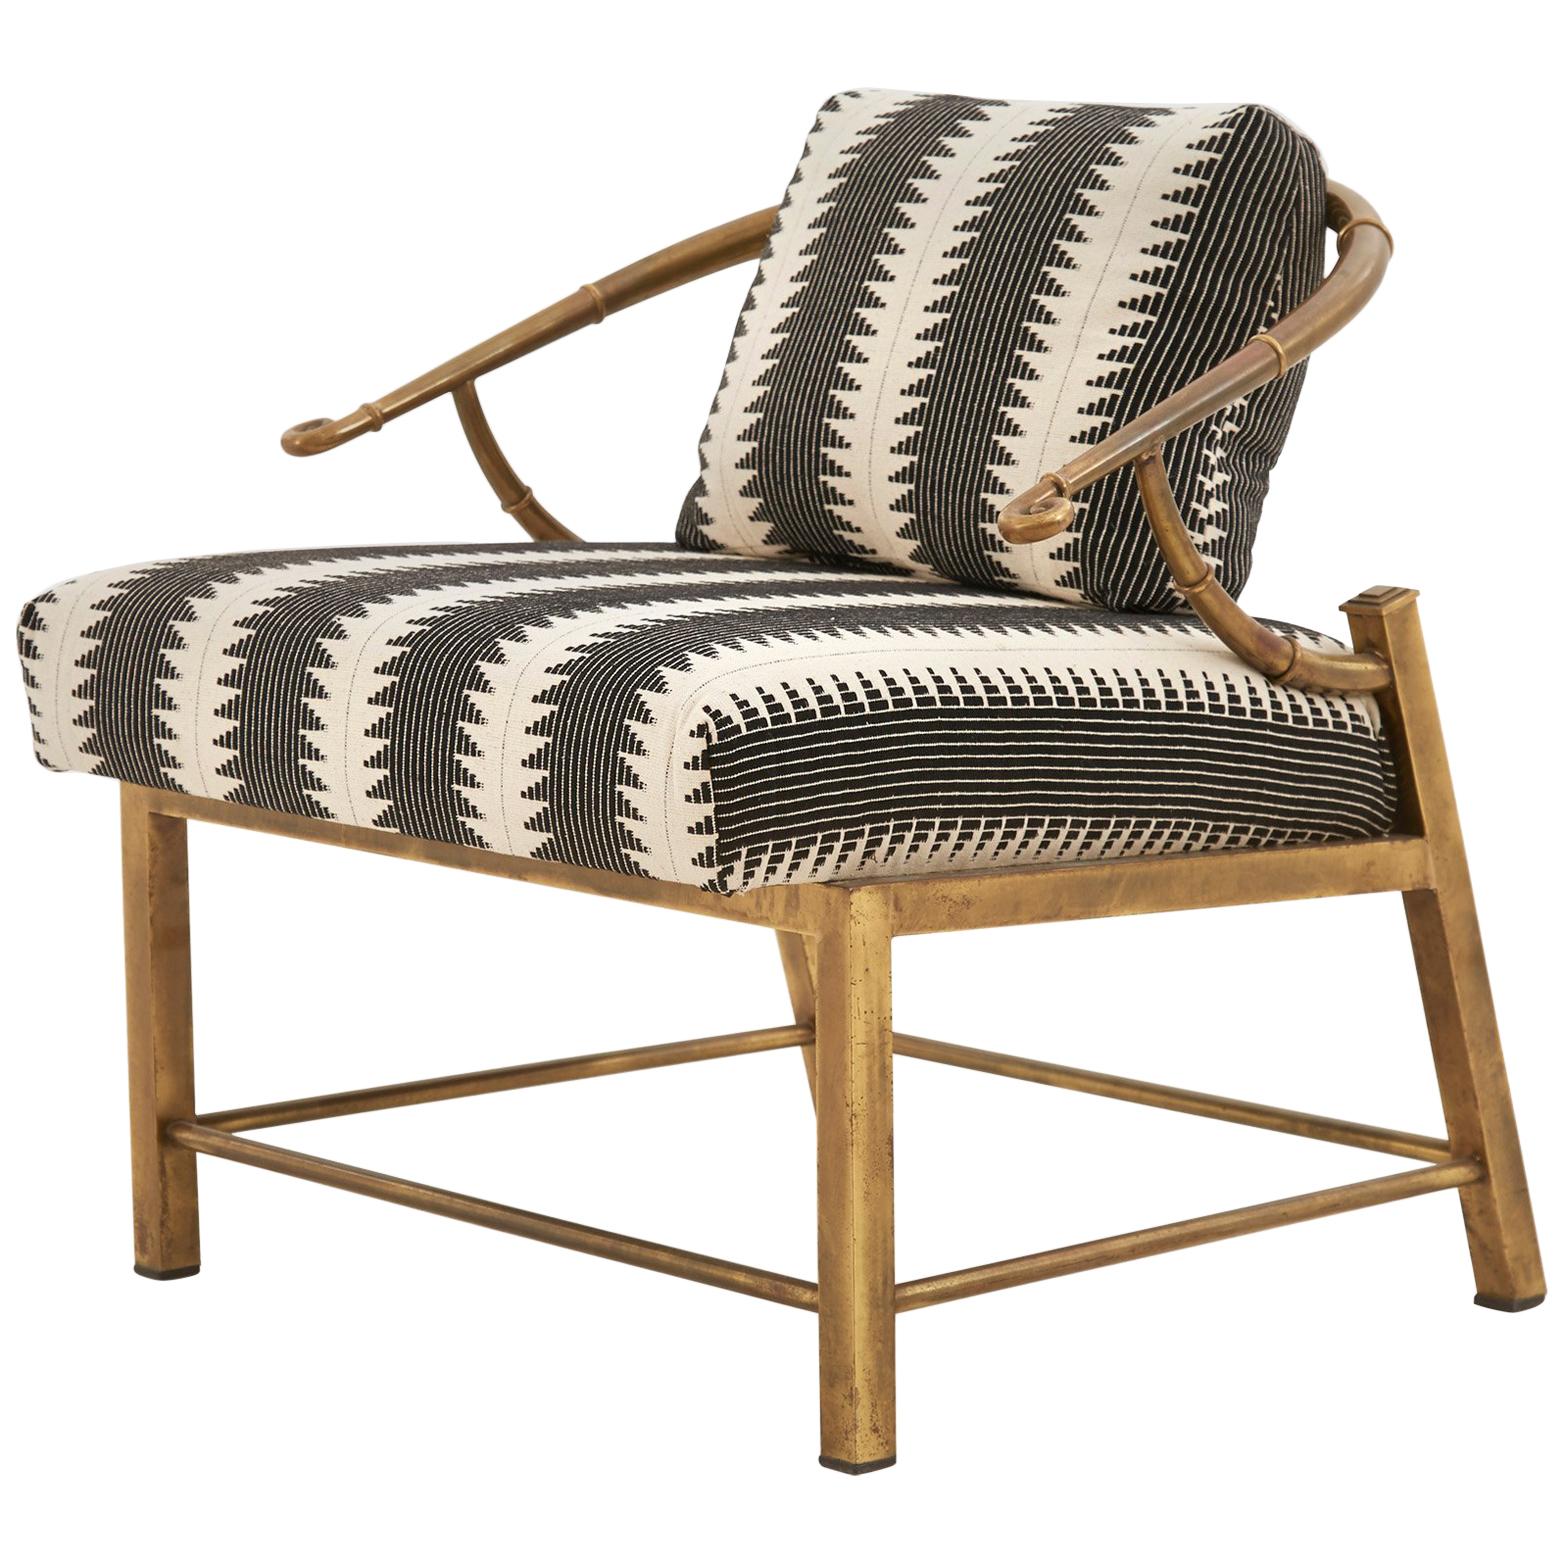 Chinoiserie Brass Lounge Chair Designed by Charles Pengally for Mastercraft